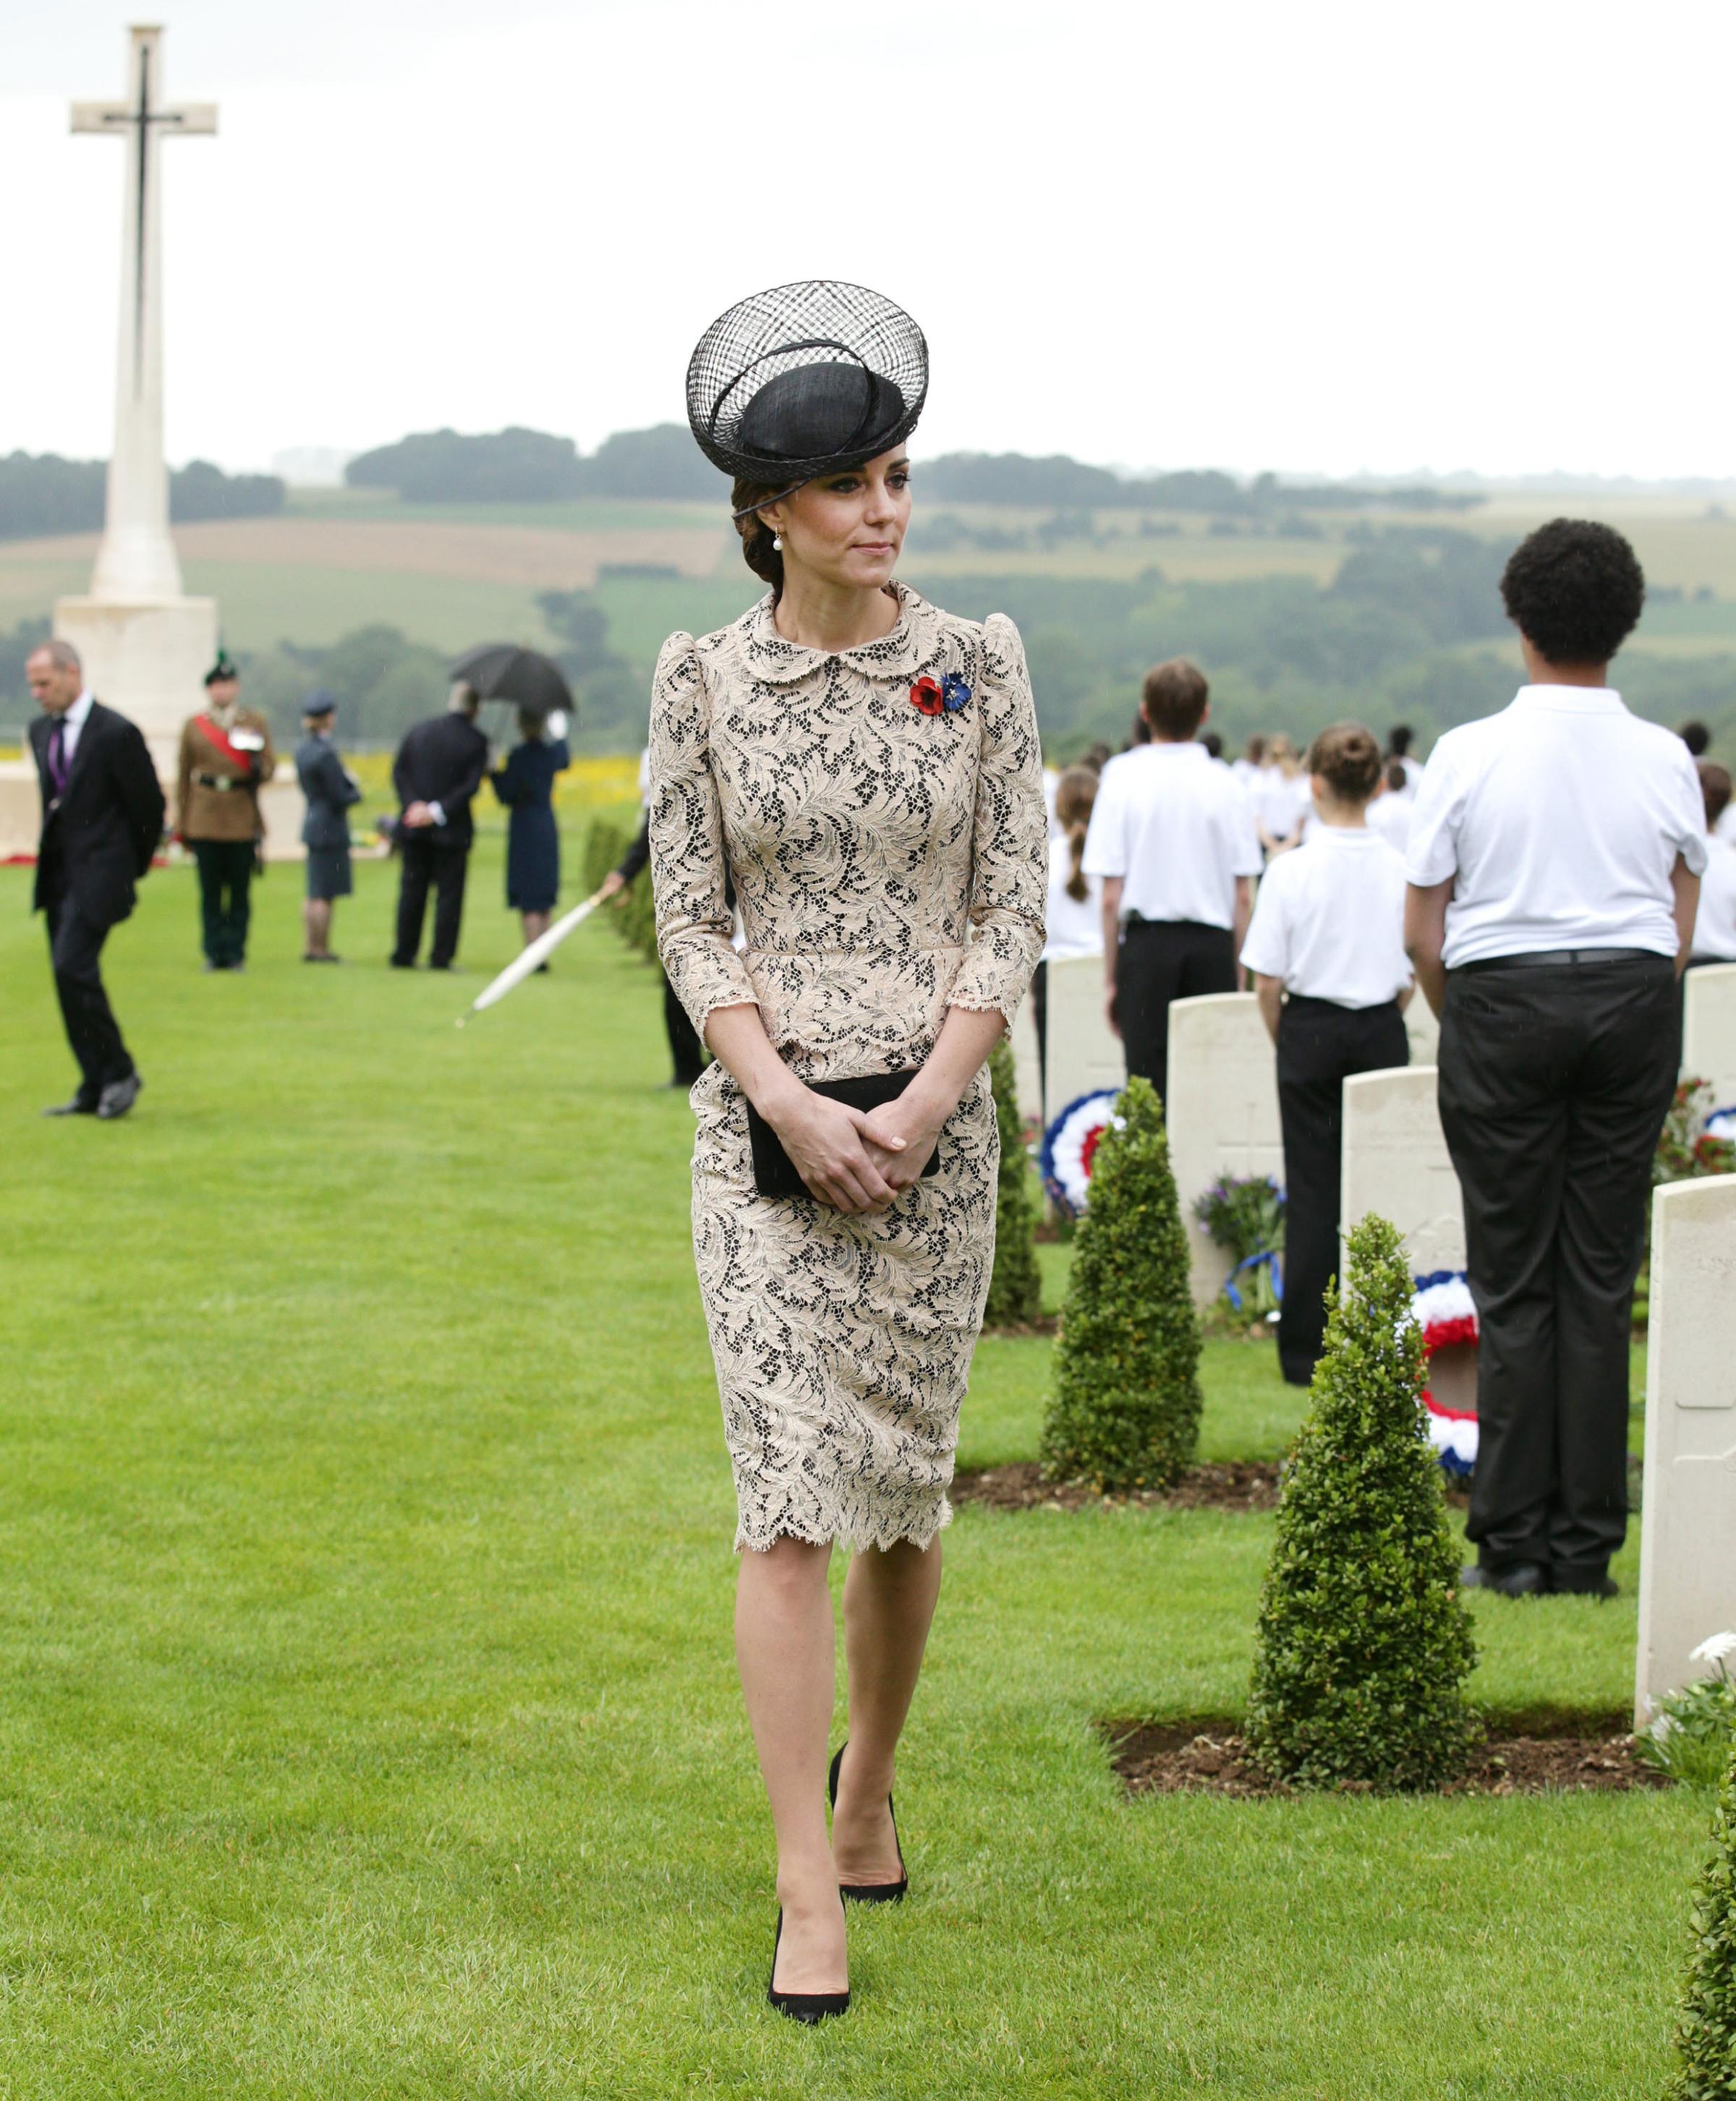 Catherine, Duchess of Cambridge, attends The Commemoration of the Centenary of The Battle of the Somme at The Commonwealth War Graves Commision Thiepval Memorial in Albert, France, on July 01, 2016.